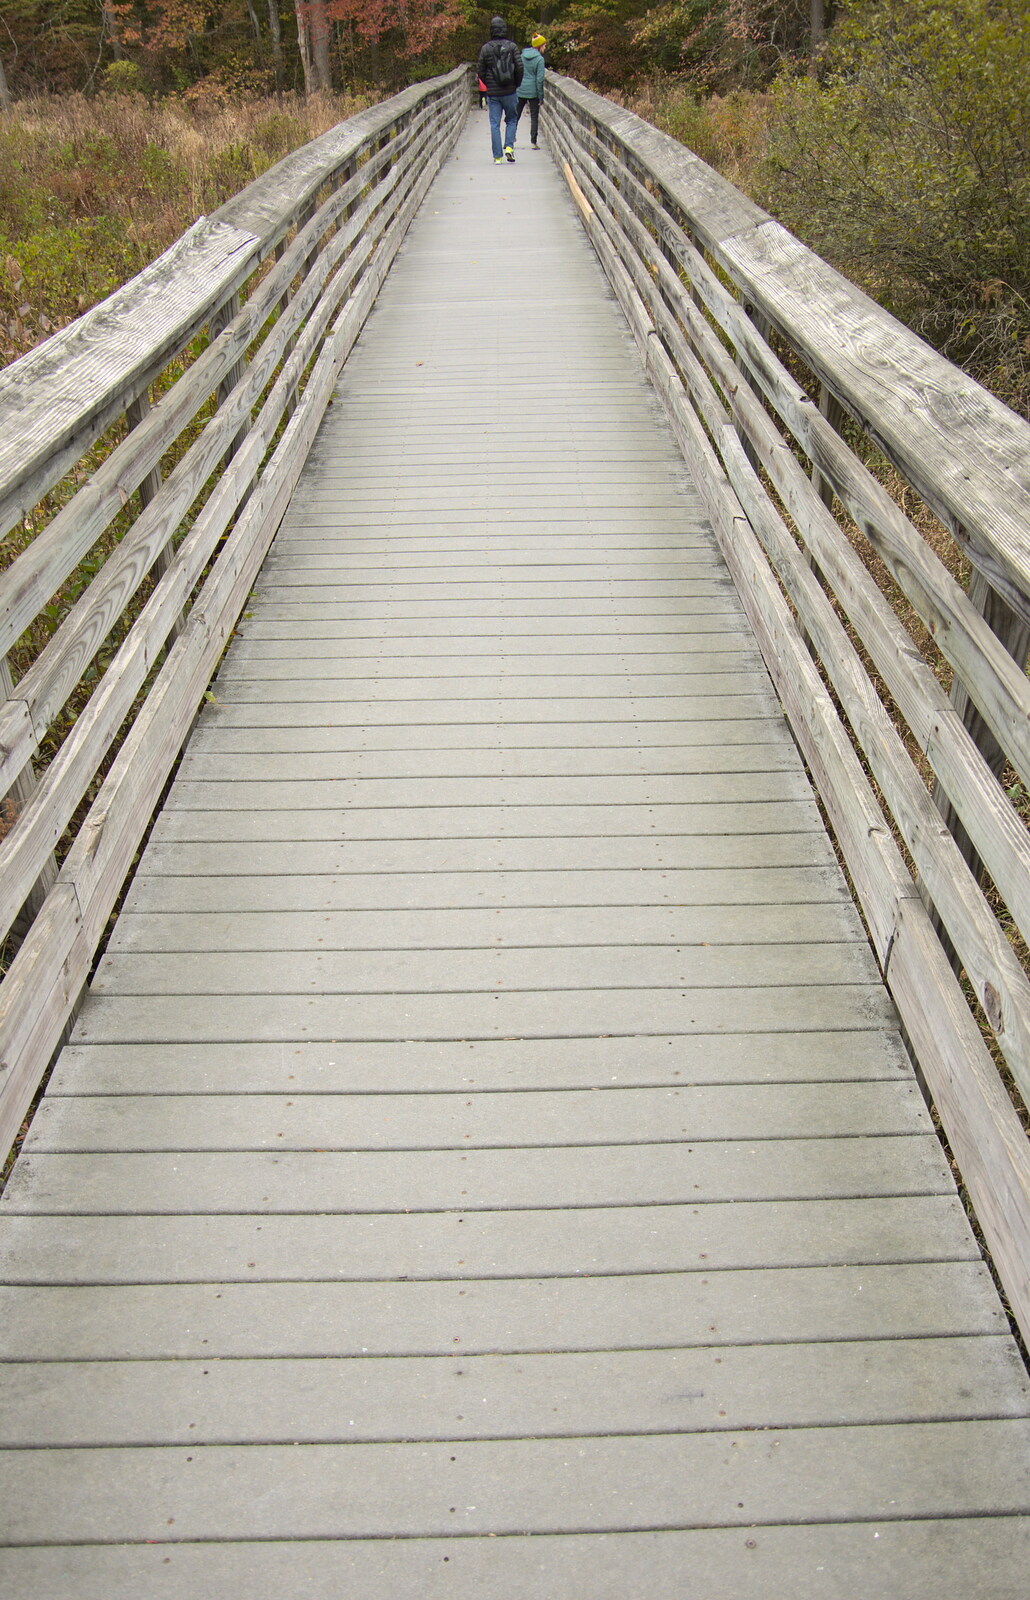 A silver-bleached boardwalk from A Trip to Short Hills, New Jersey, United States - 20th October 2018